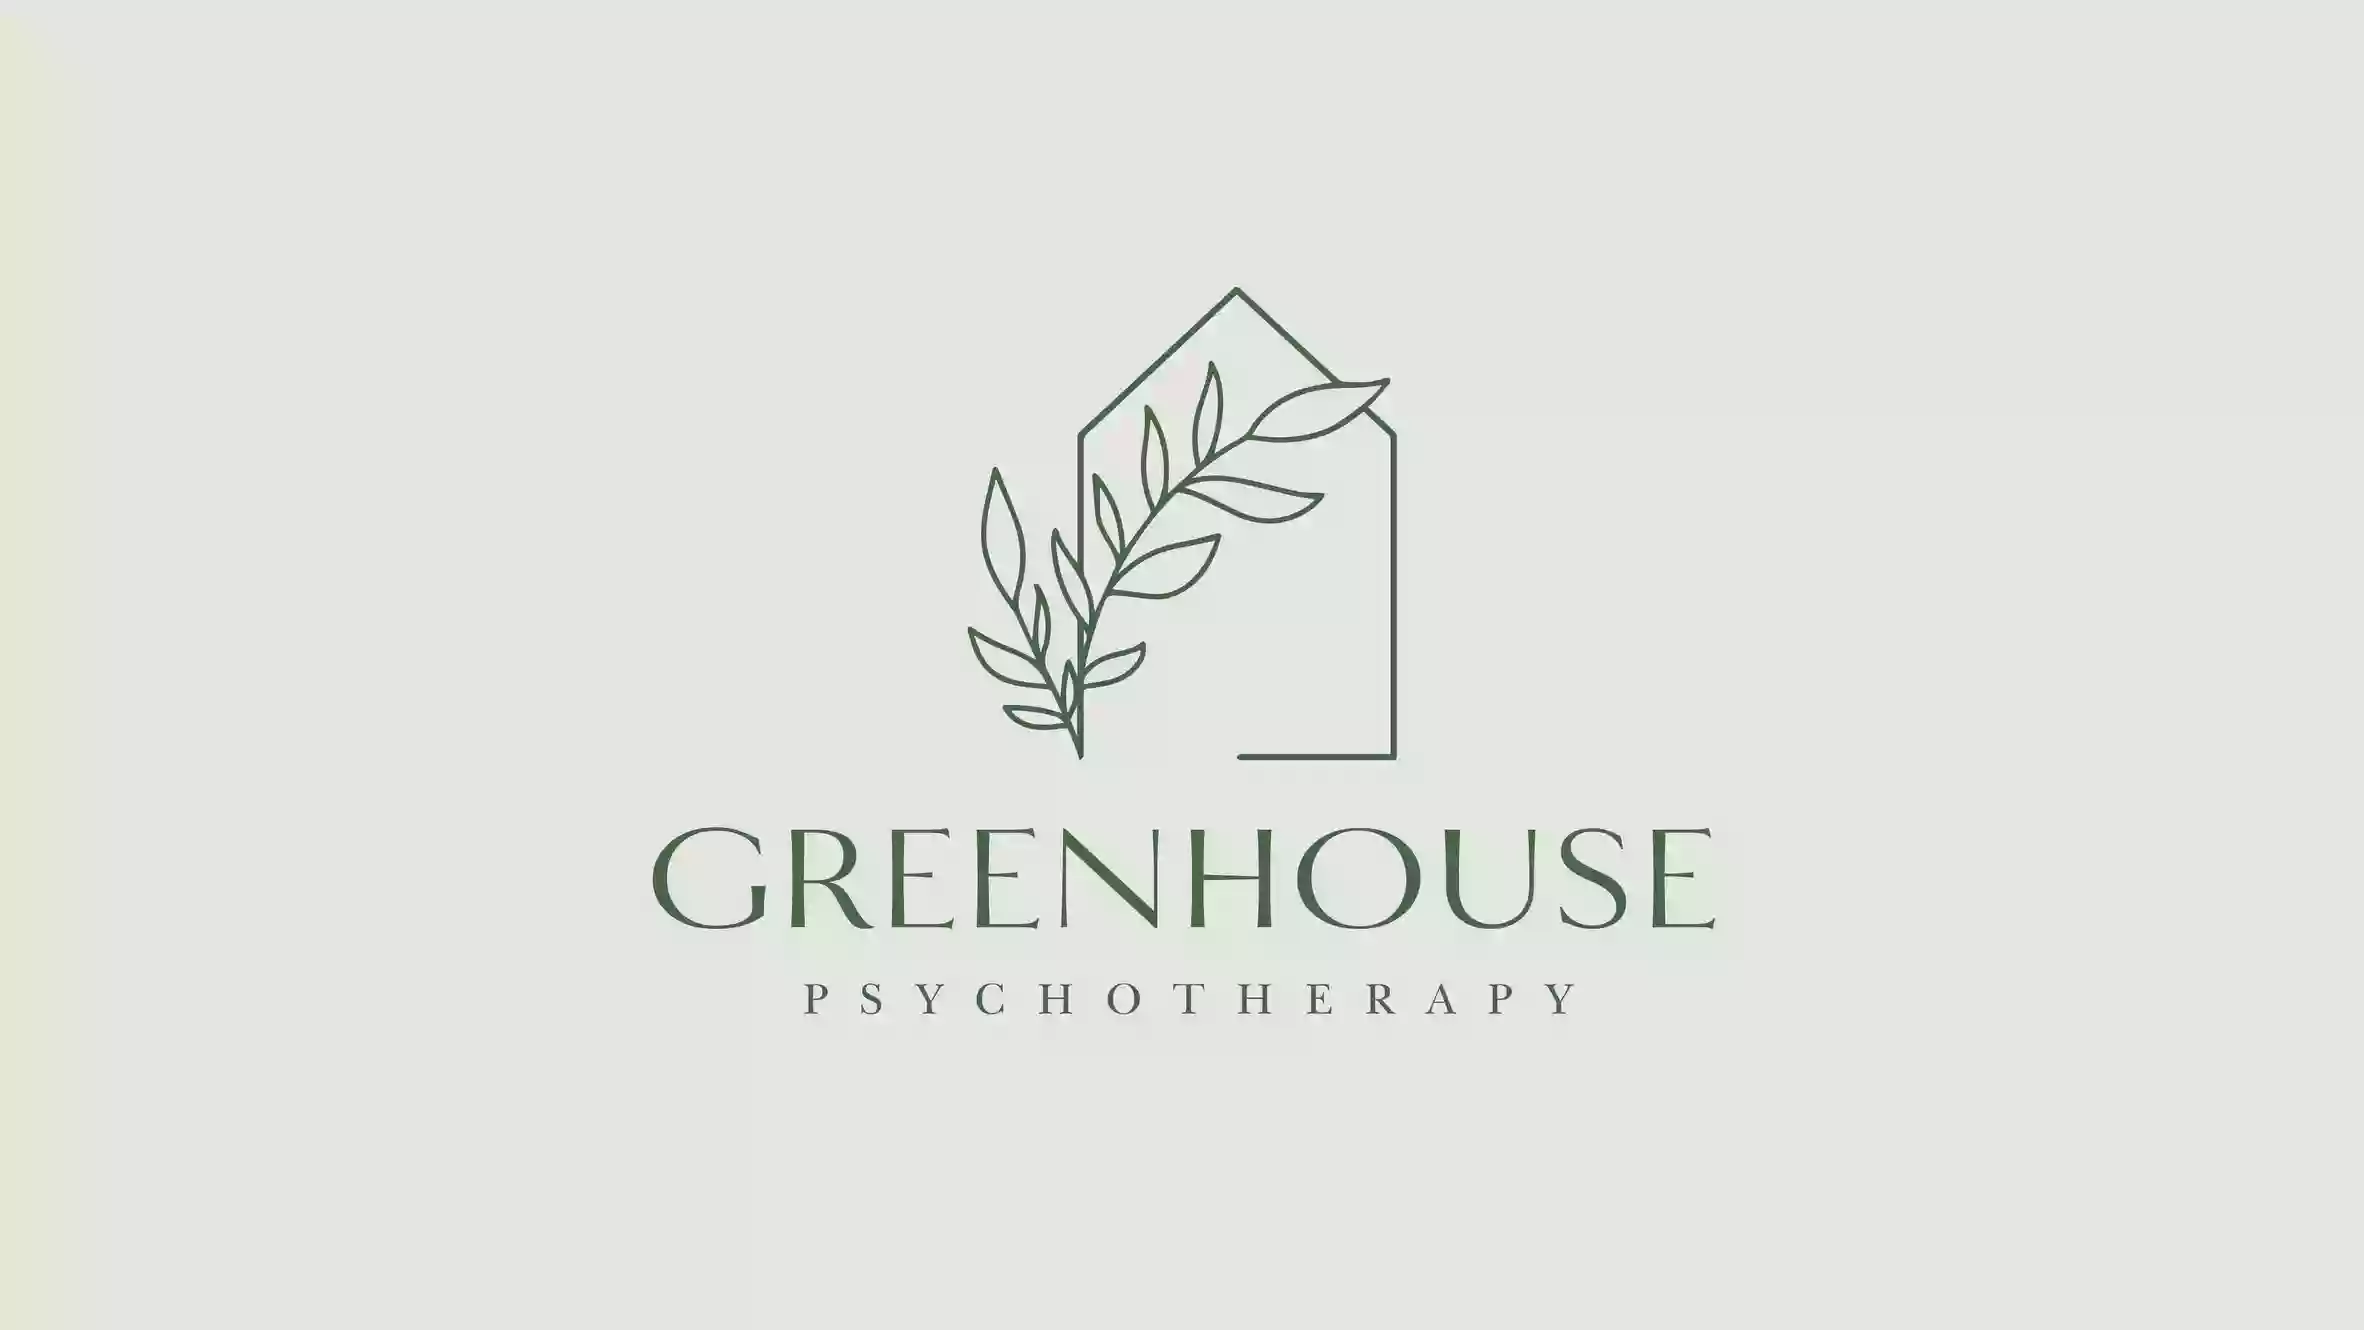 Greenhouse Psychotherapy